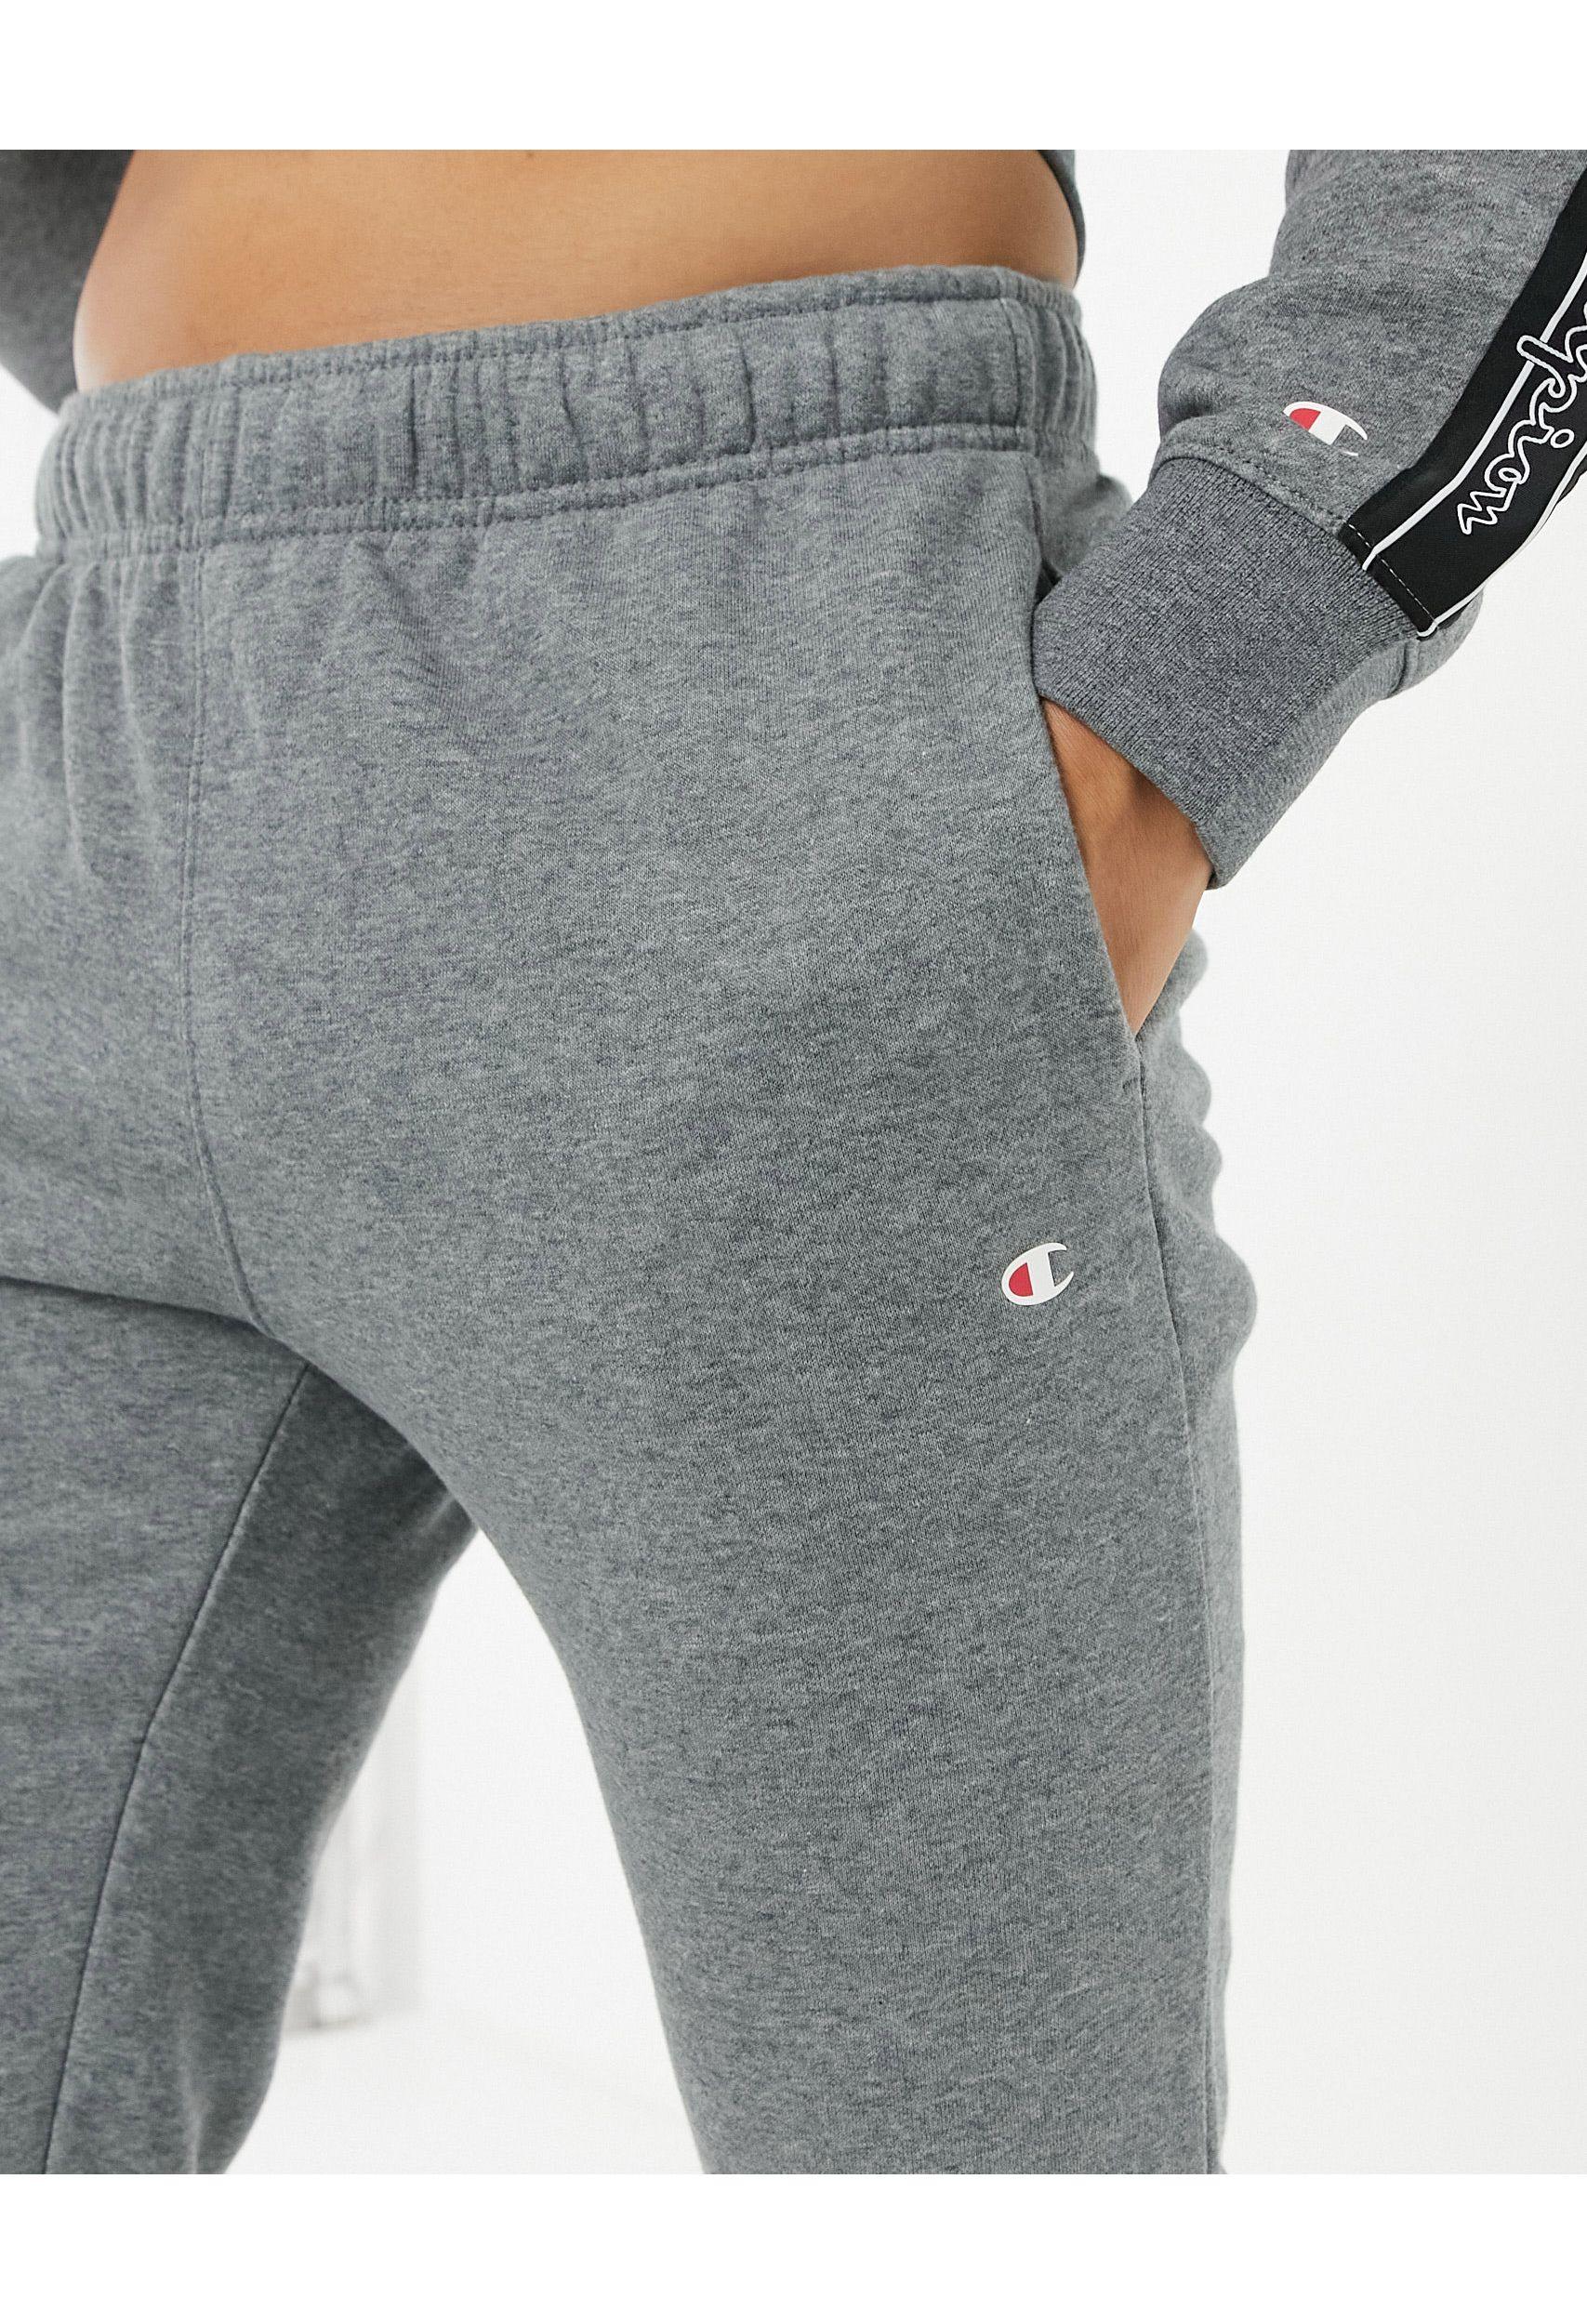 Small Logo Cuffed joggers in Grey for Men - Lyst